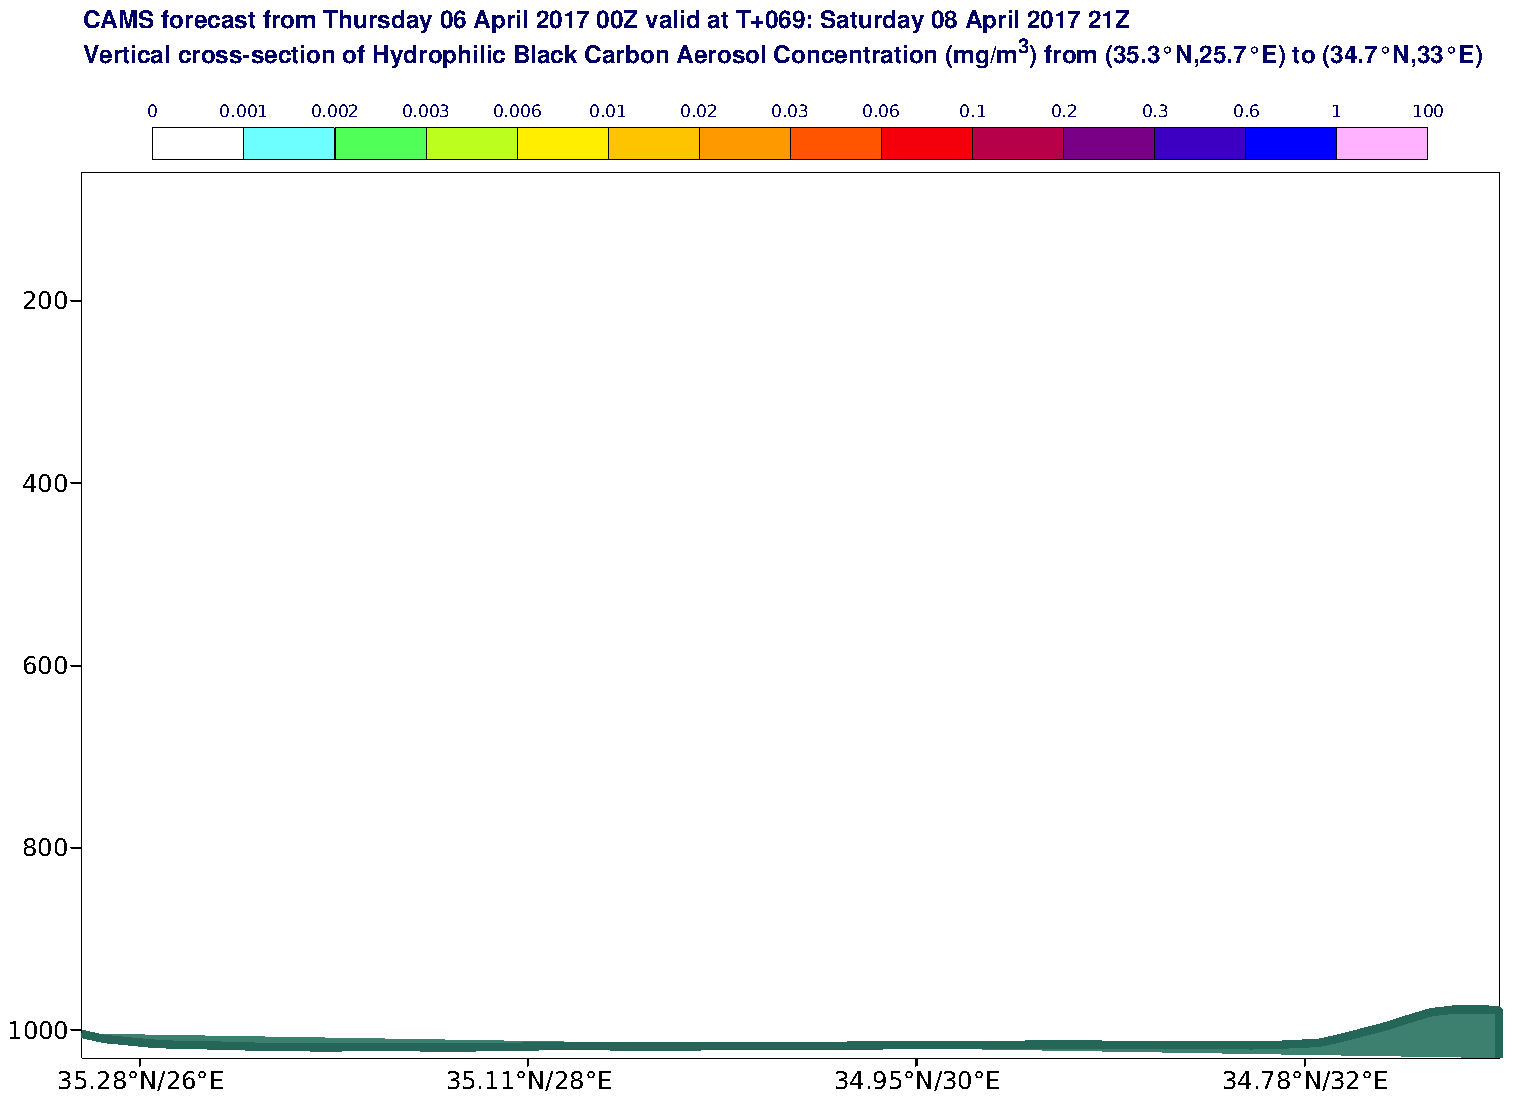 Vertical cross-section of Hydrophilic Black Carbon Aerosol Concentration (mg/m3) valid at T69 - 2017-04-08 21:00